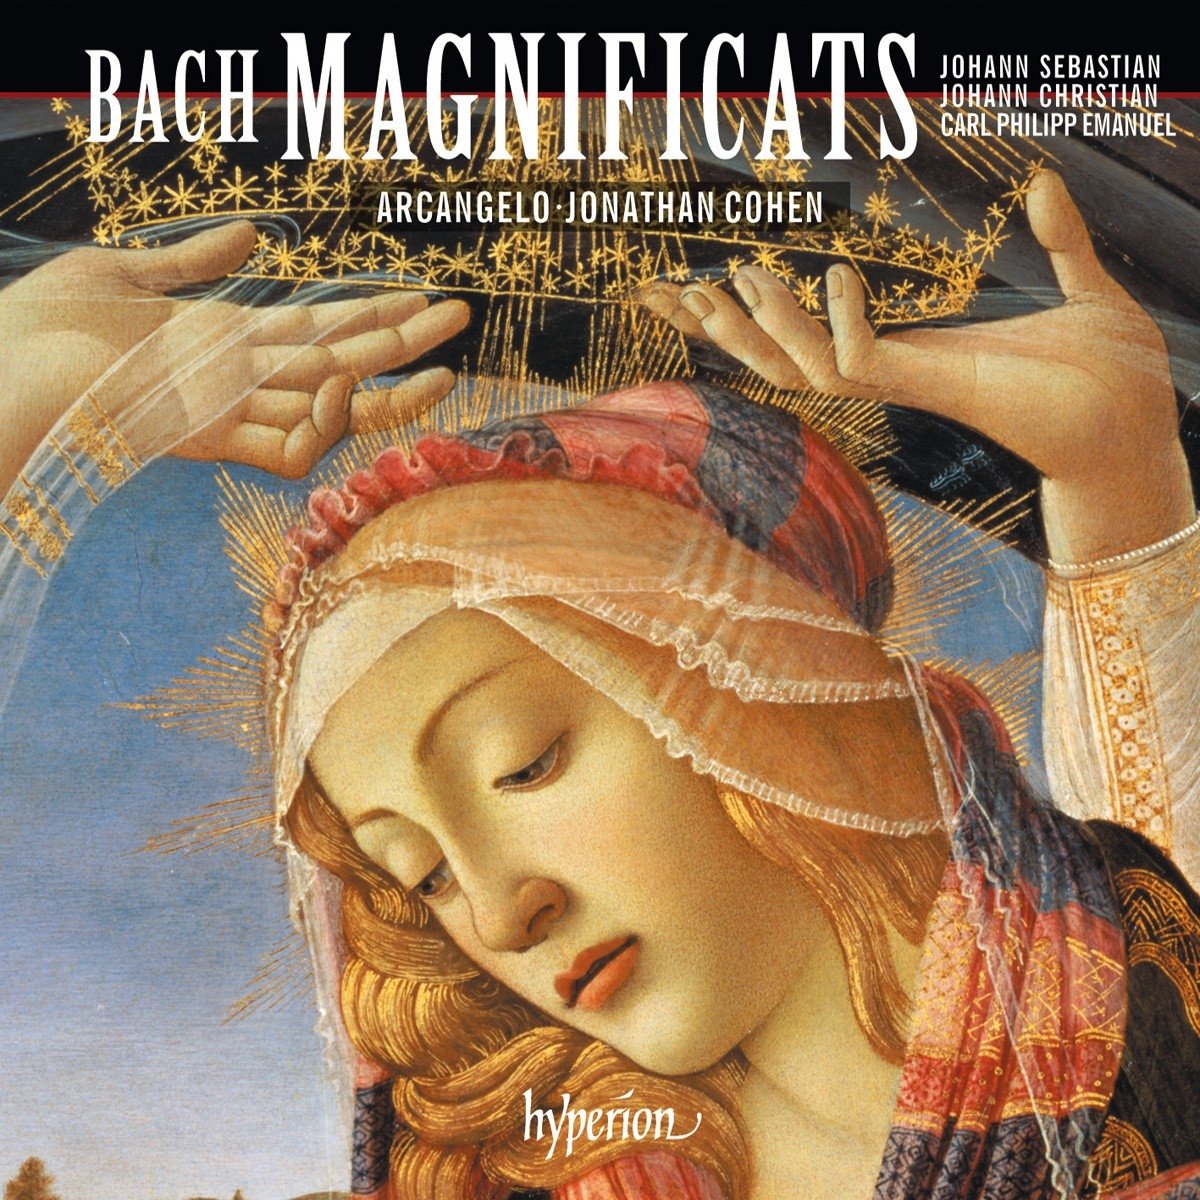 Bach, Bach And Bach: Magnificats - Arcangelo